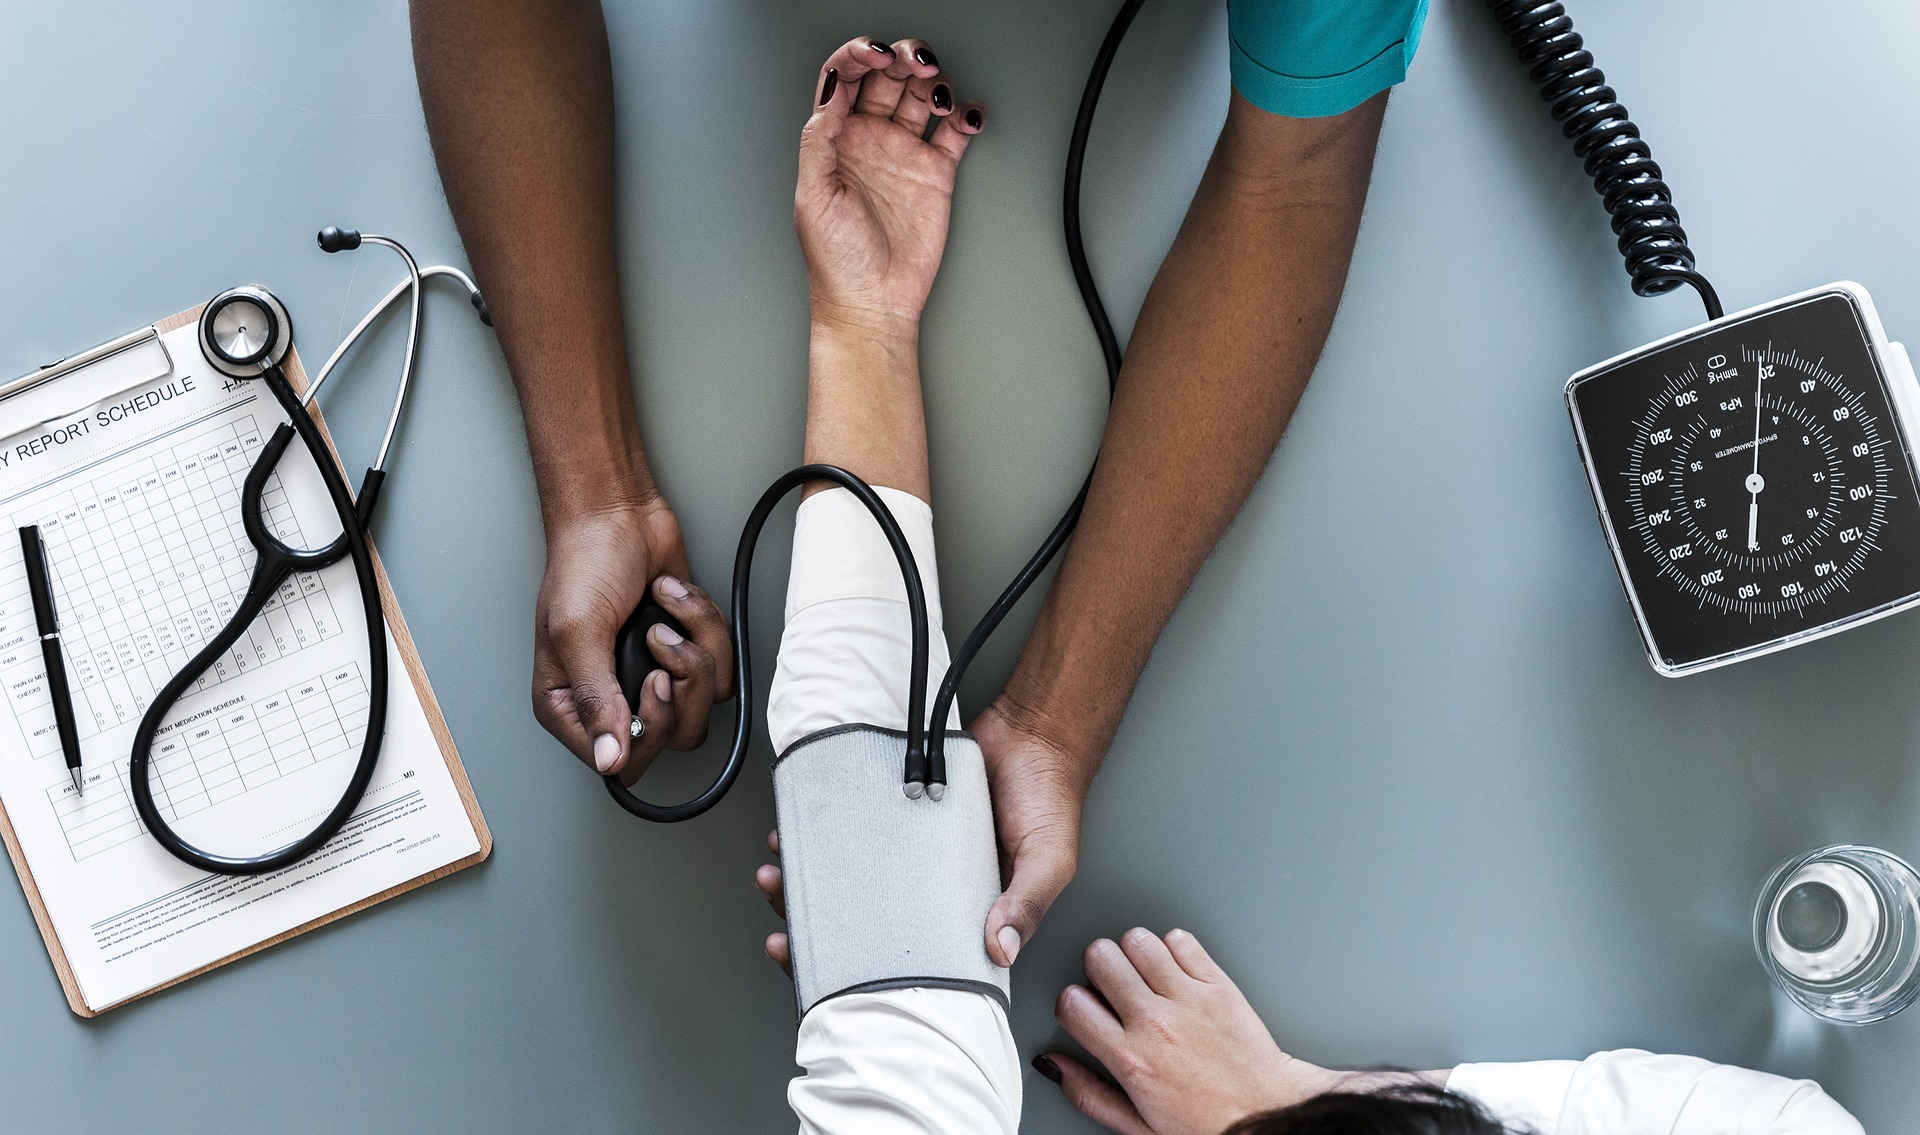 At least 3 blood pressure measurements needed for accurate diagnosis